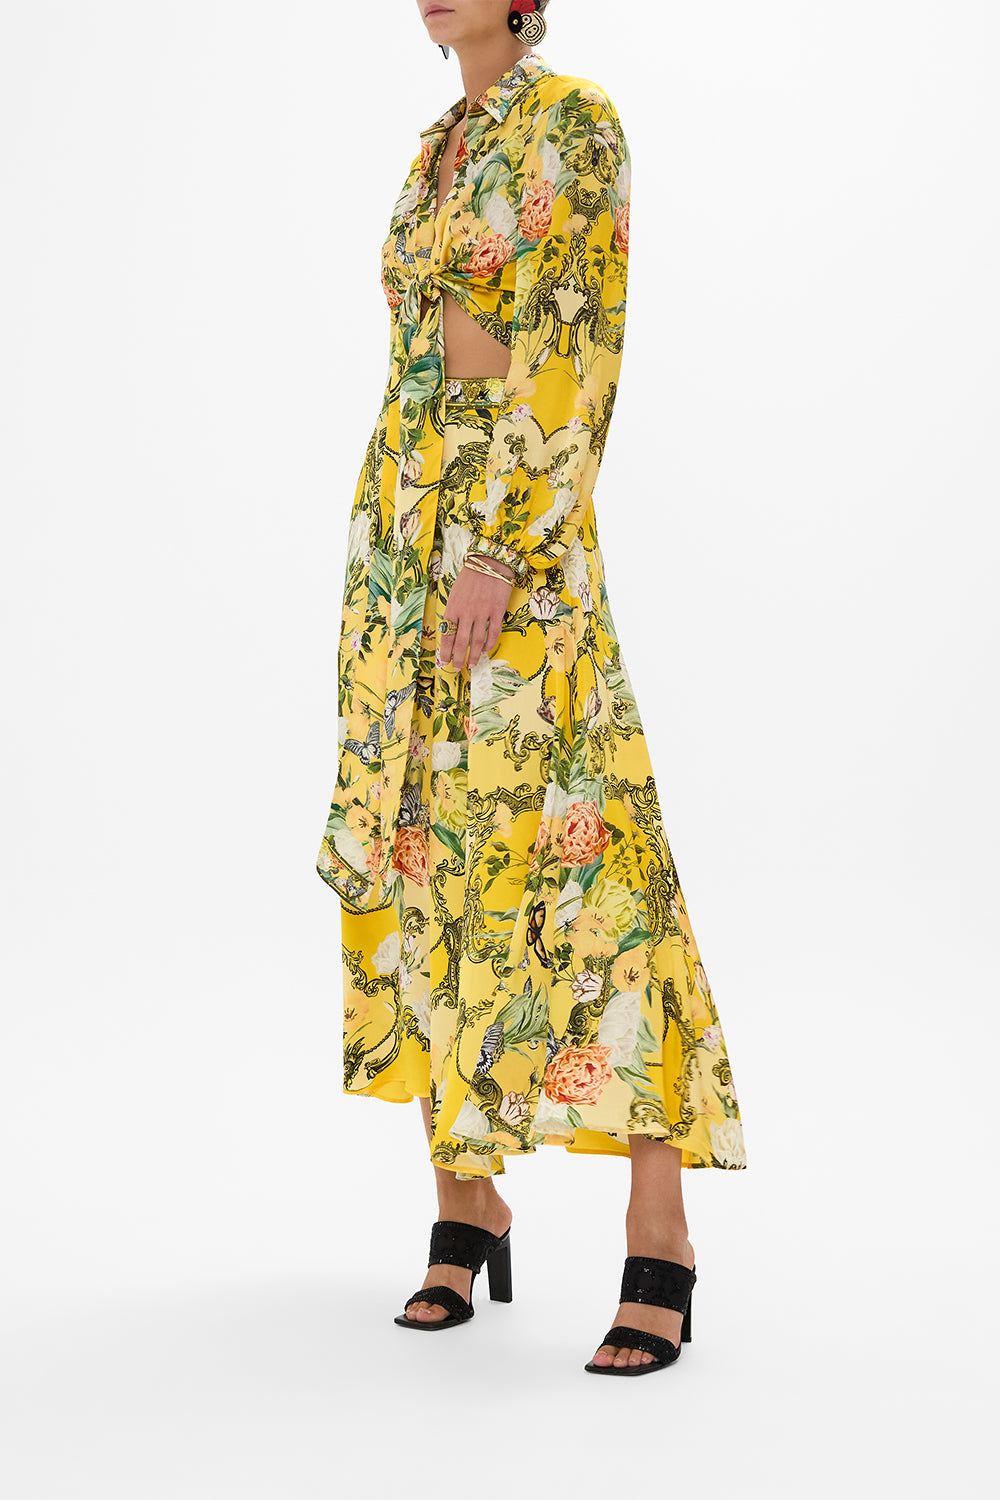 CAMILLA yellow silk cropped wrap shirt in Paths Of Gold print